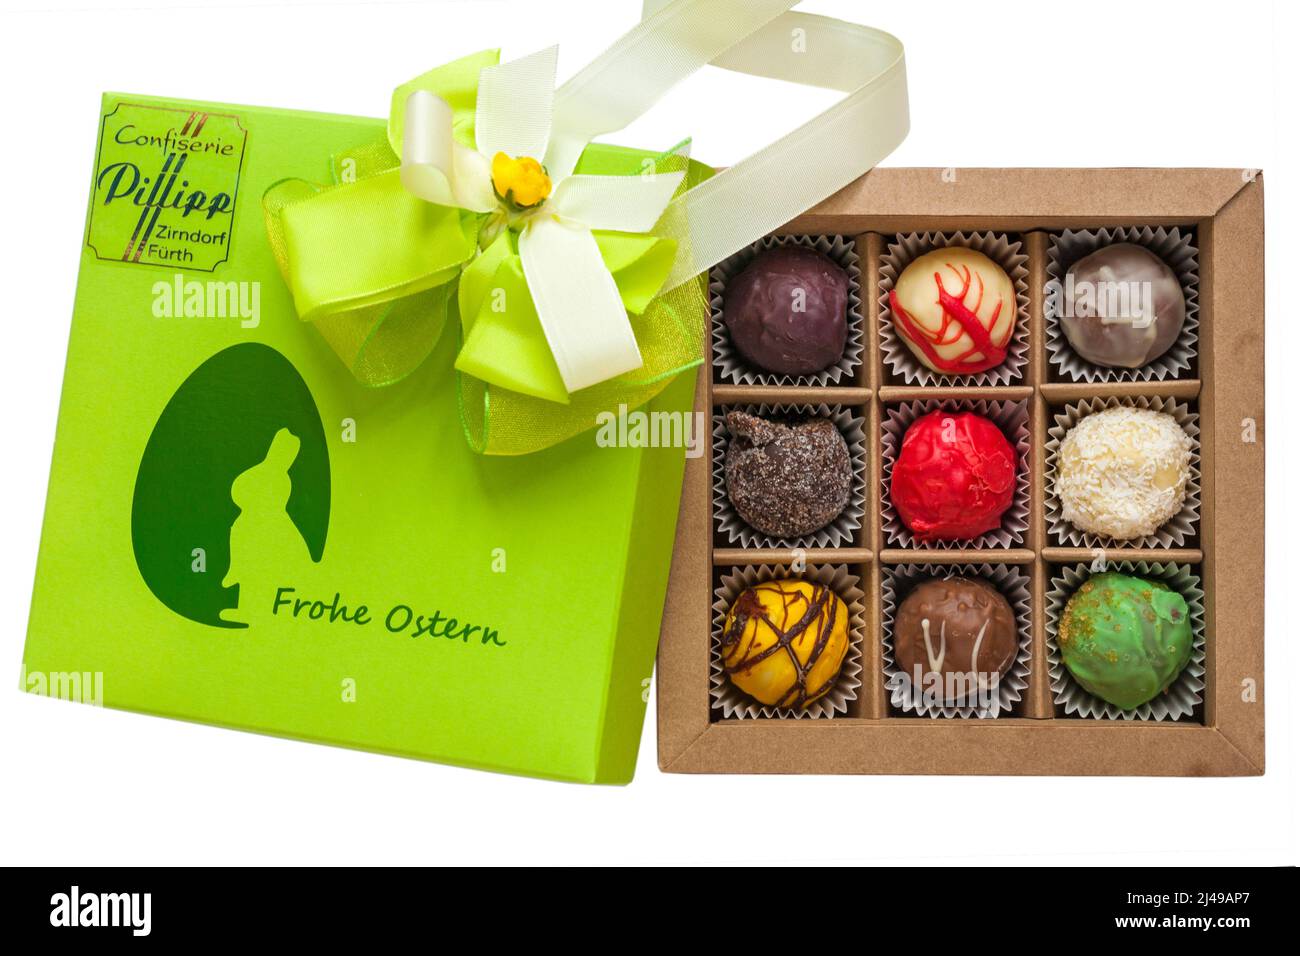 Box of Easter chocolates from Confiserie Pillipp Zirndorf Furth - Frohe Ostern with lid removed to show contents isolated on white background Stock Photo